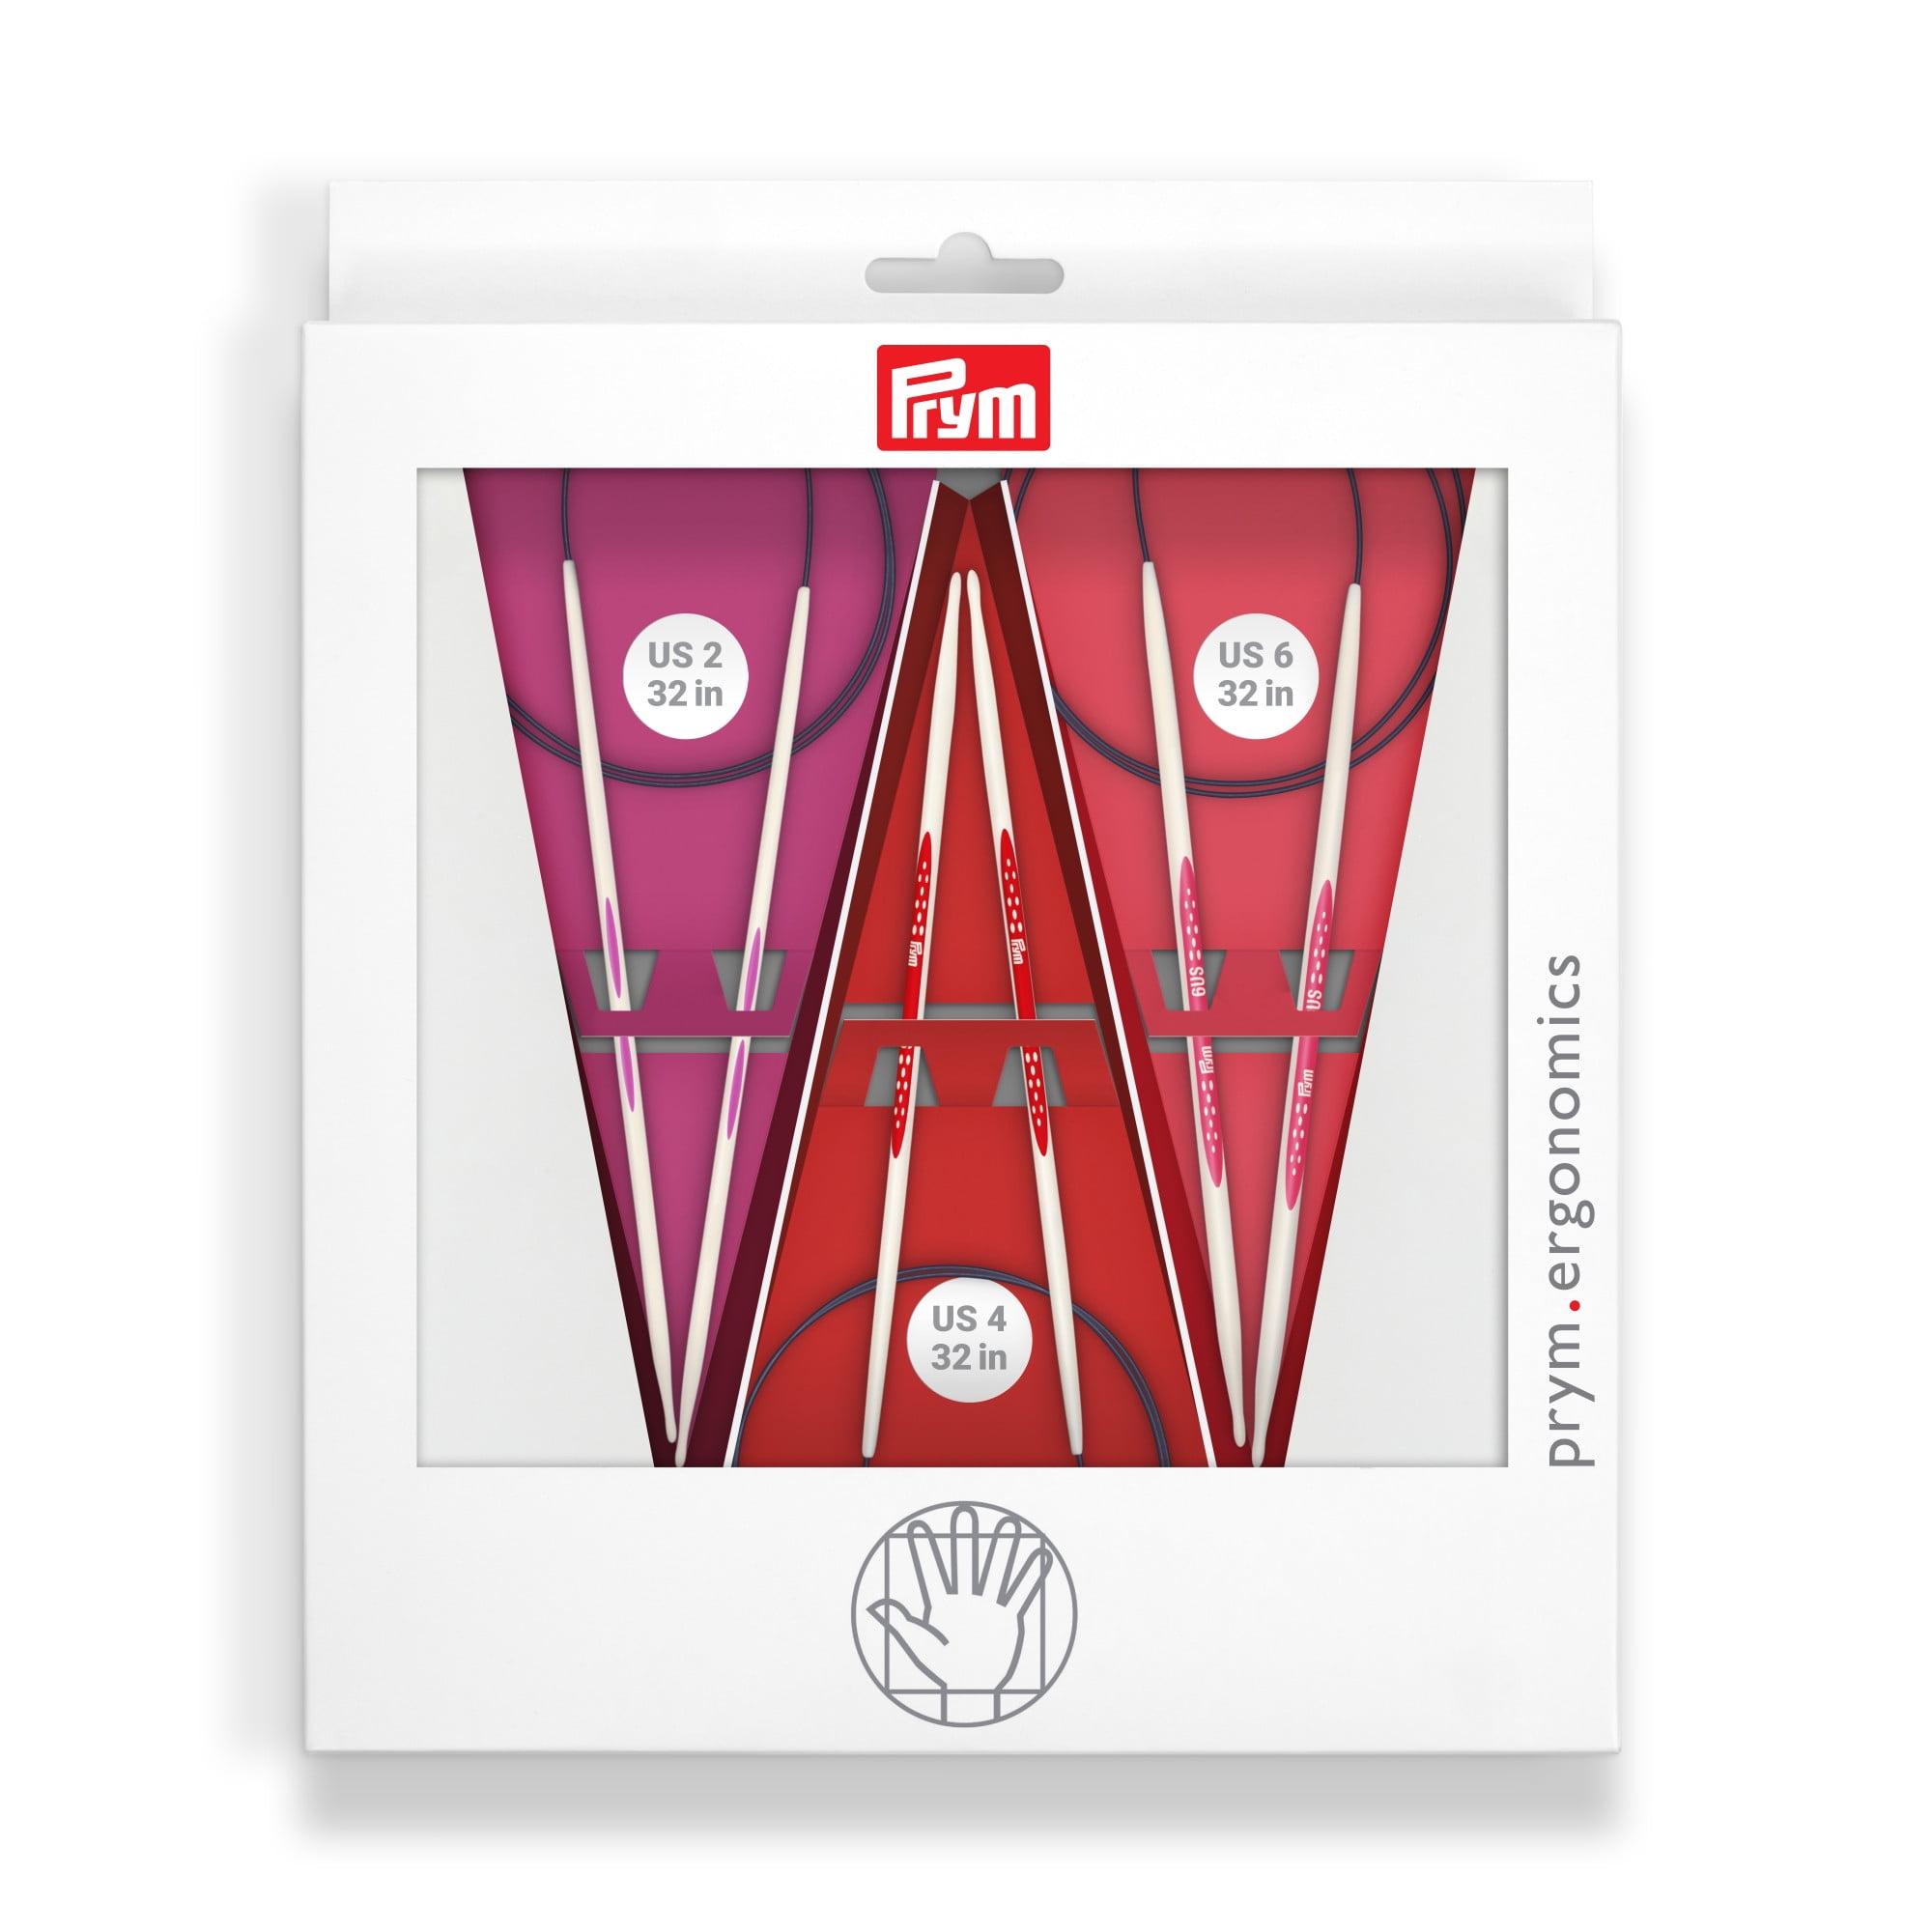 Doll - Hand Sewing Needles, (Ref. 131140) by Prym® – Blanks for